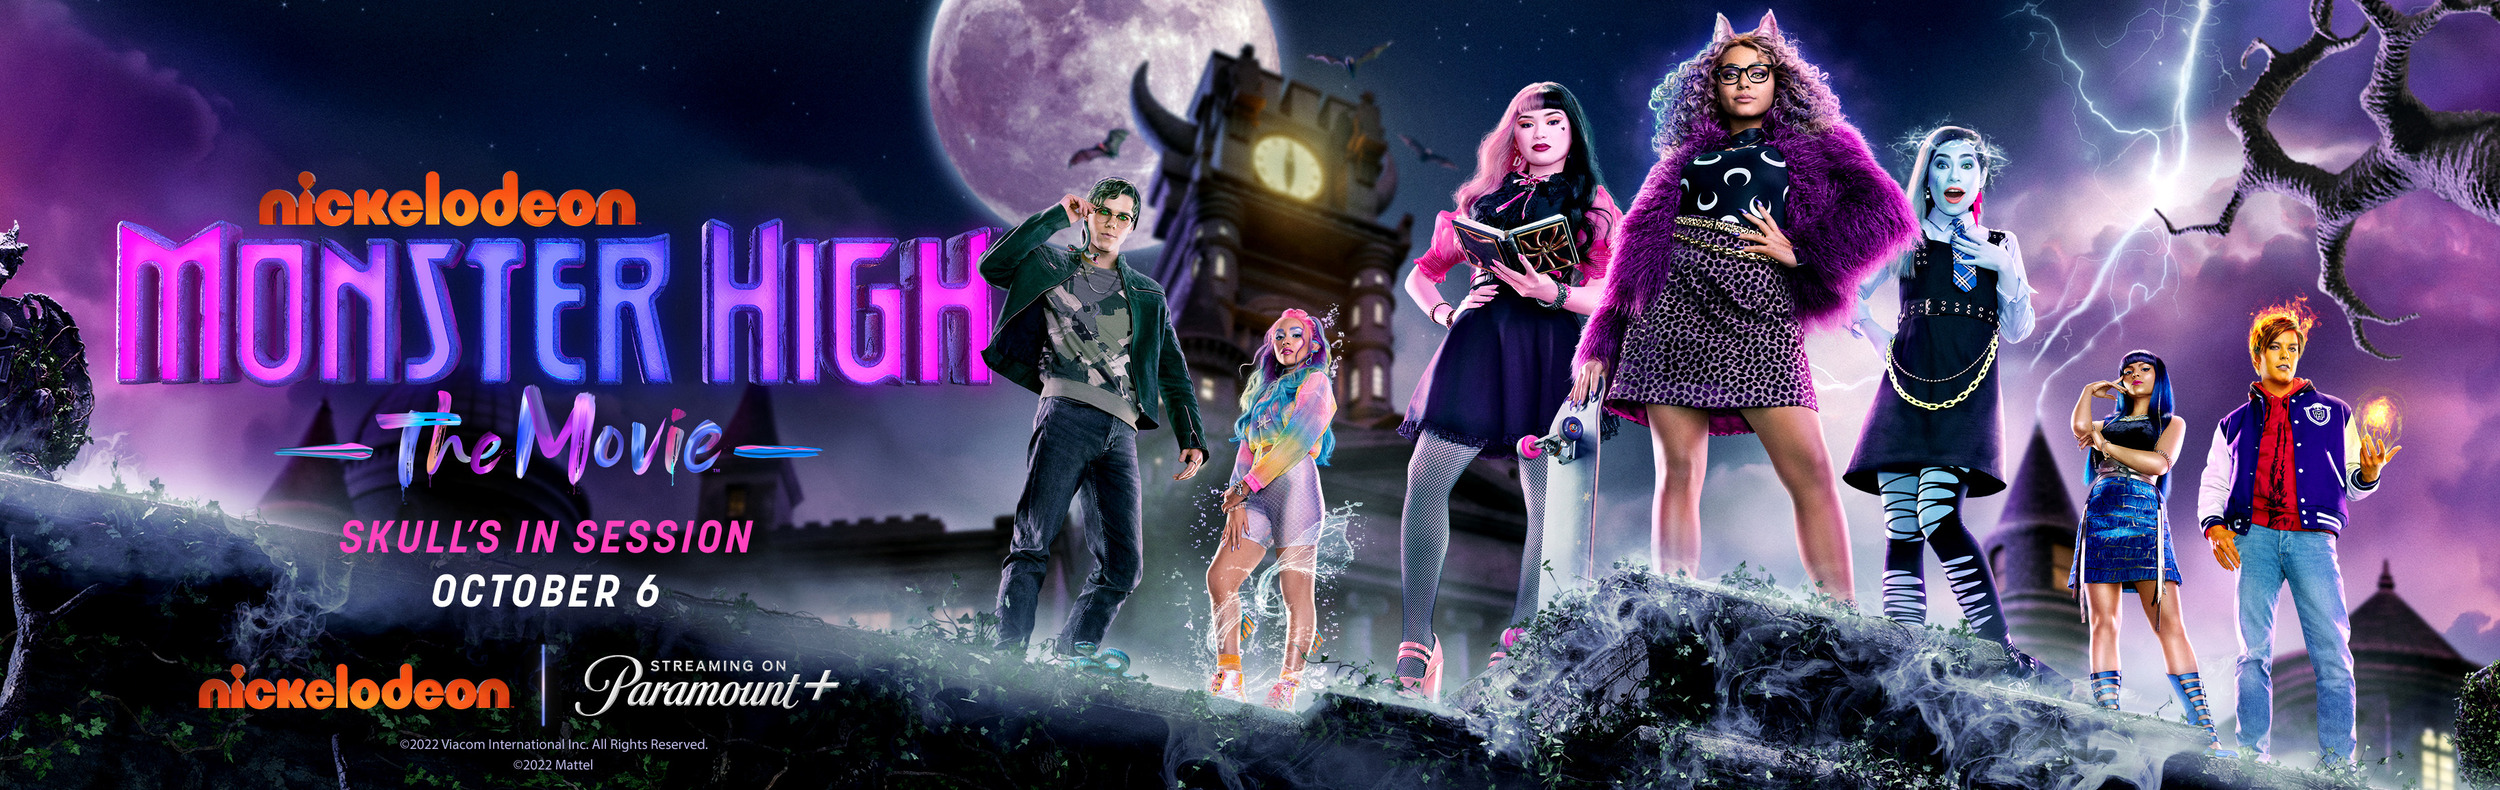 Mega Sized TV Poster Image for Monster High: The Movie (#11 of 13)